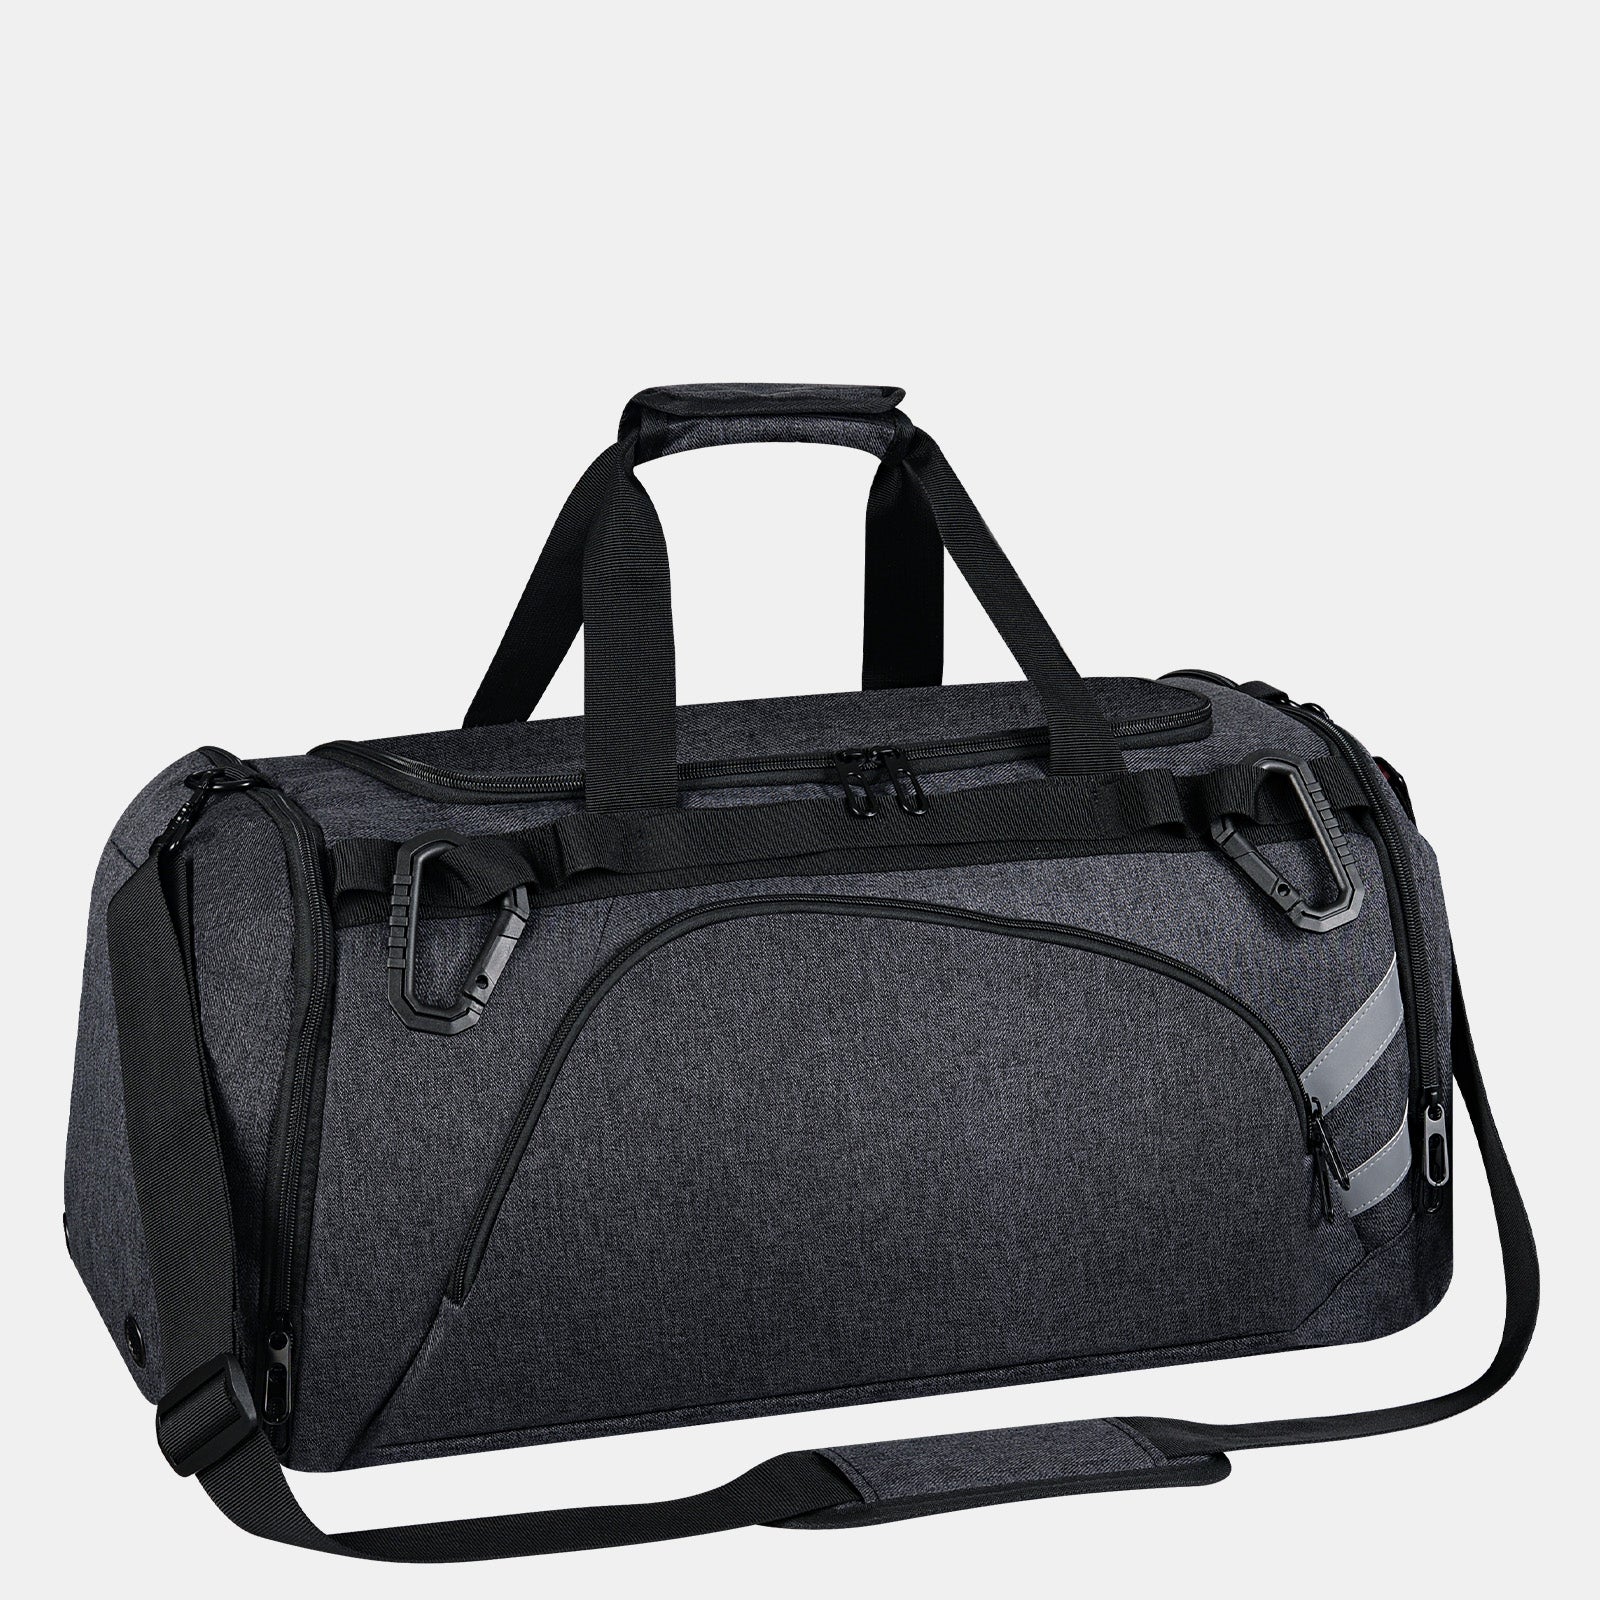 Bertasche Duffel Backpack with Shoe Compartment & Wet Pocket